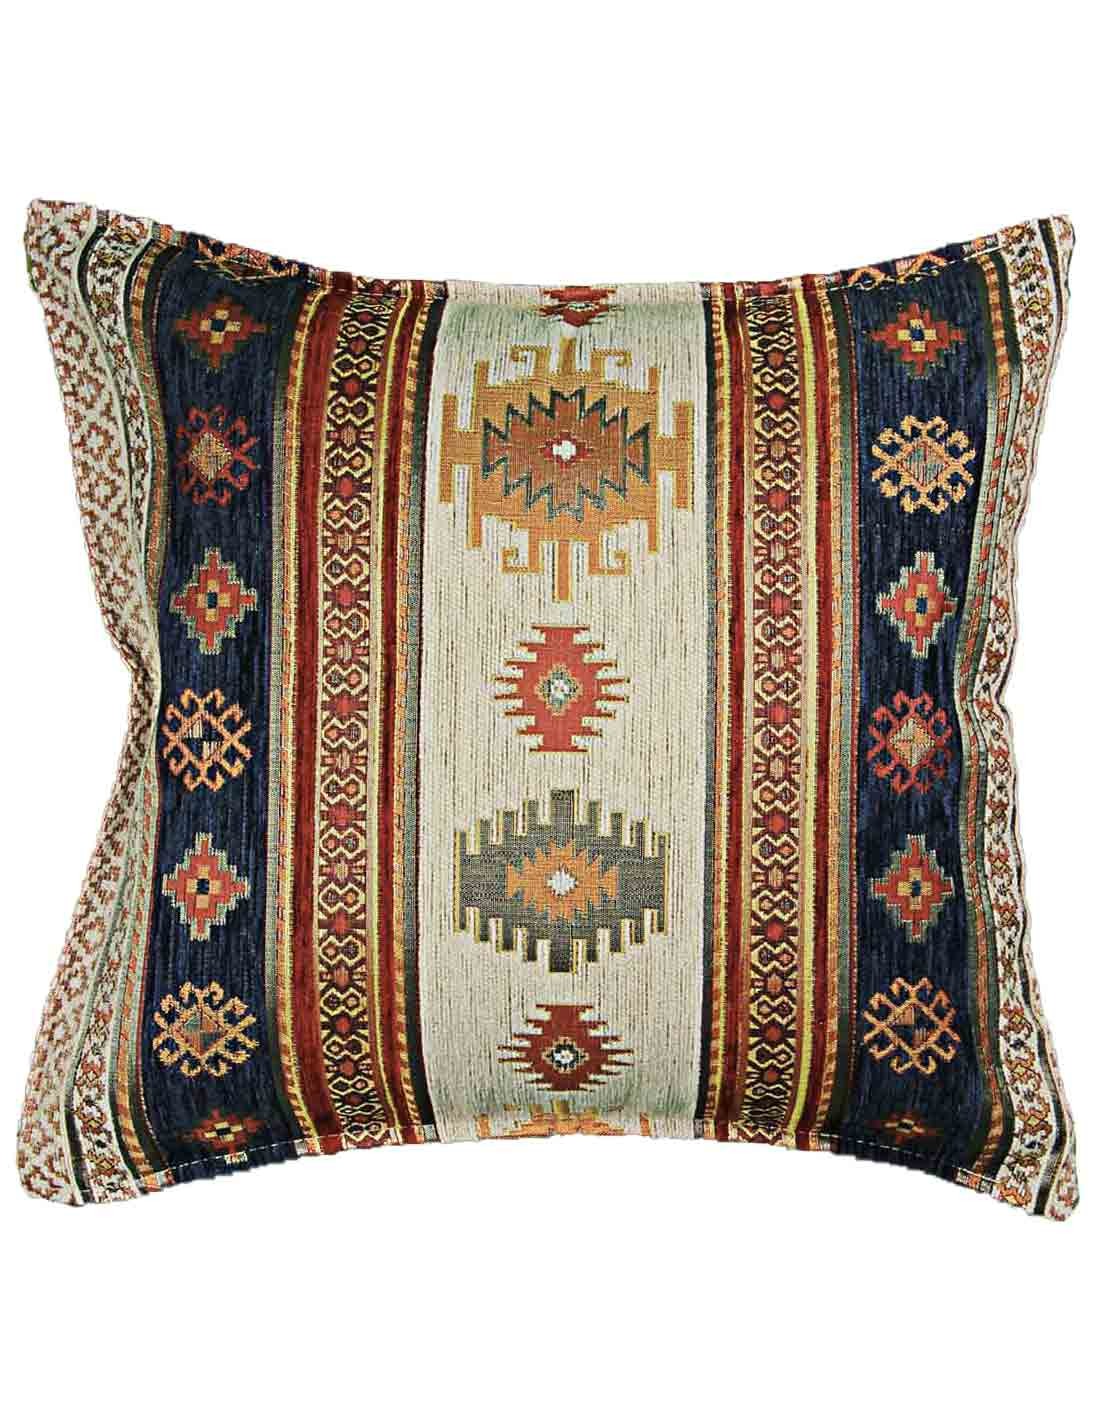 Turkish cushion cover in Montreal? Indian cushion cover in Canada?